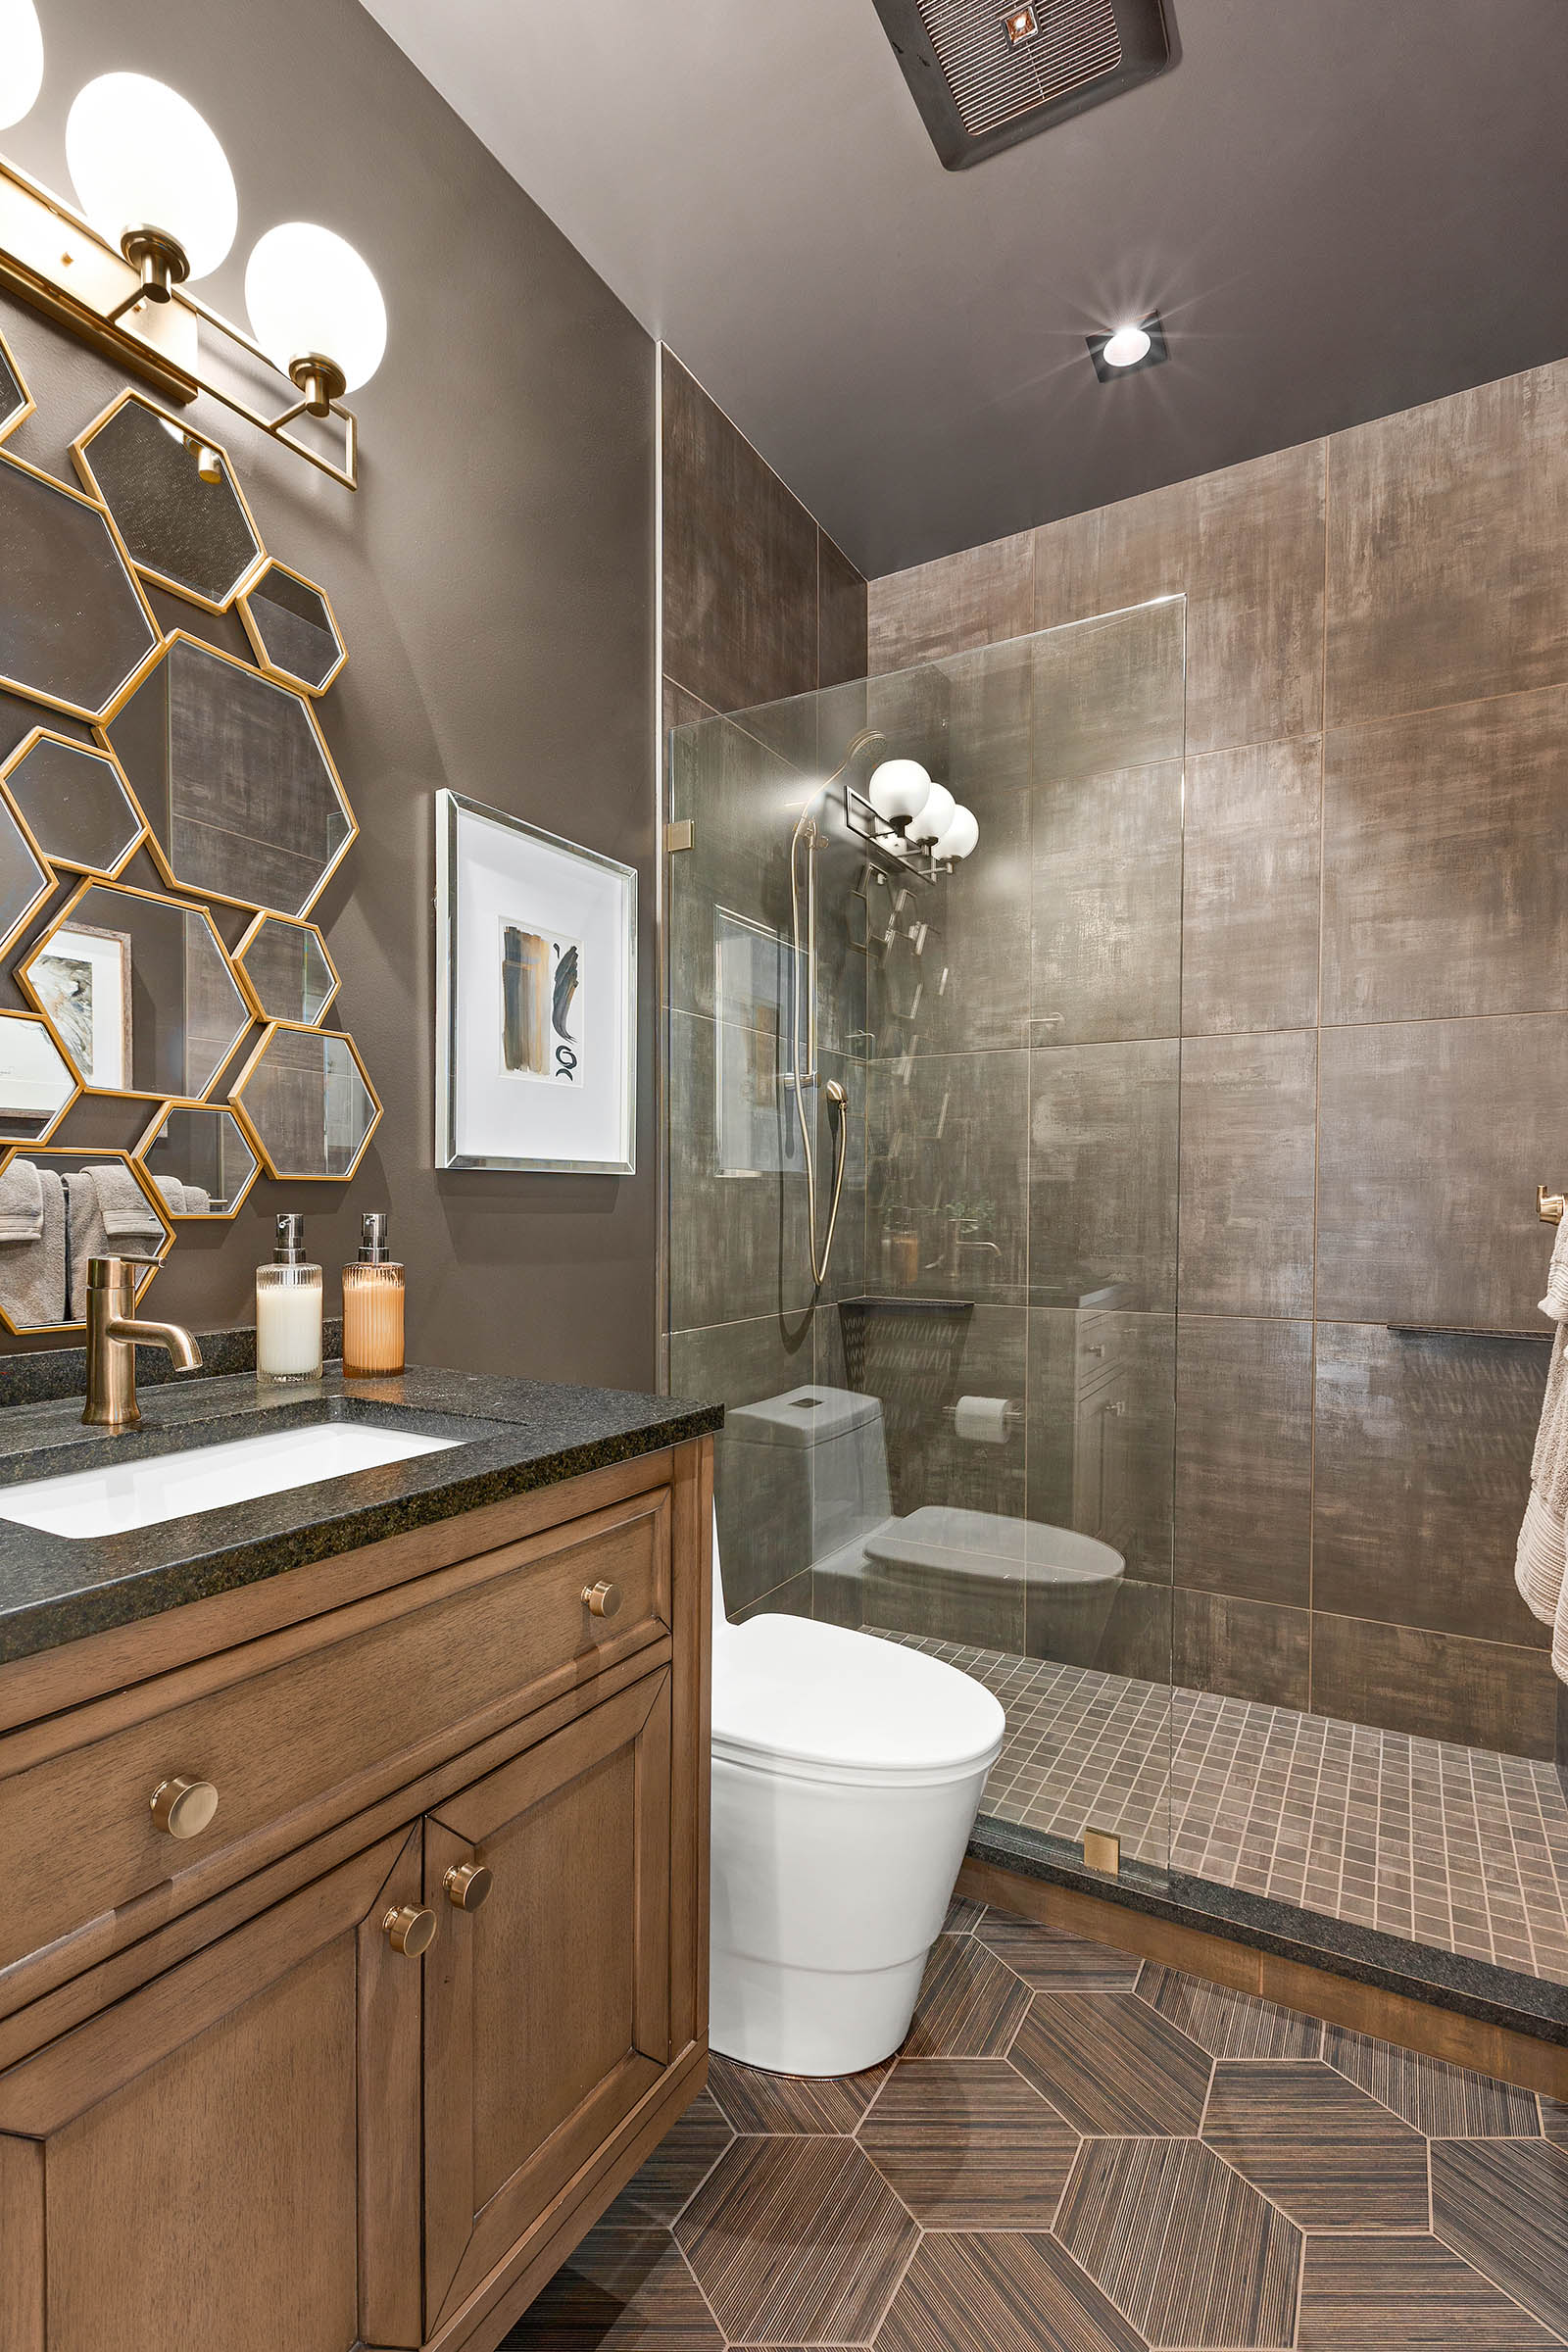 William Olson Co.'s bathroom remodel: modern design, luxurious finishes, impeccable craftsmanship